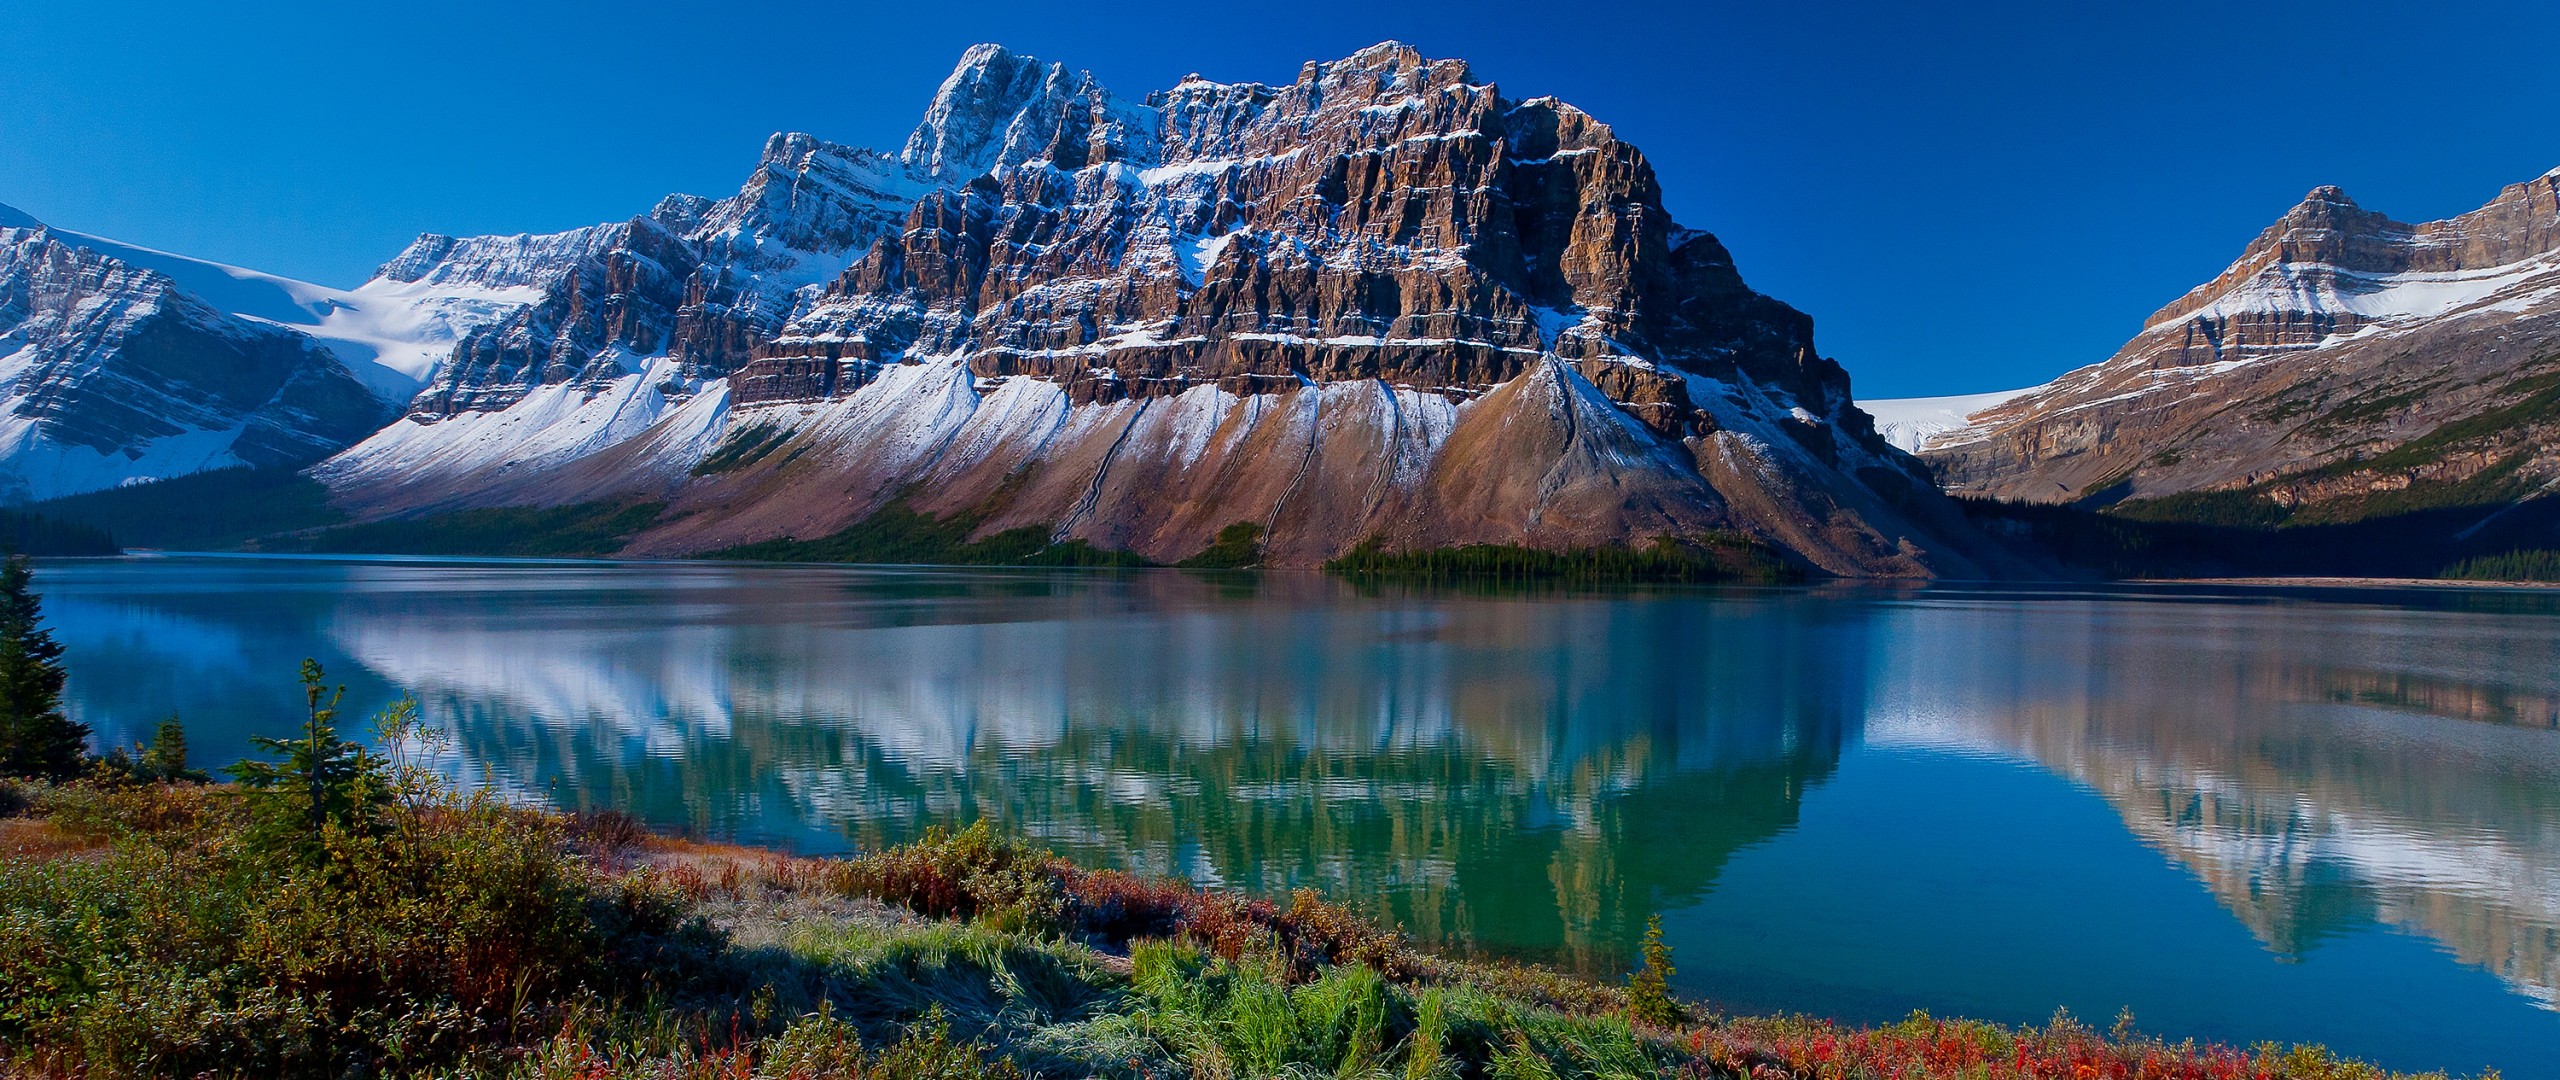 General 2560x1080 landscape lake mountains snowy mountain reflection nature spring cliff